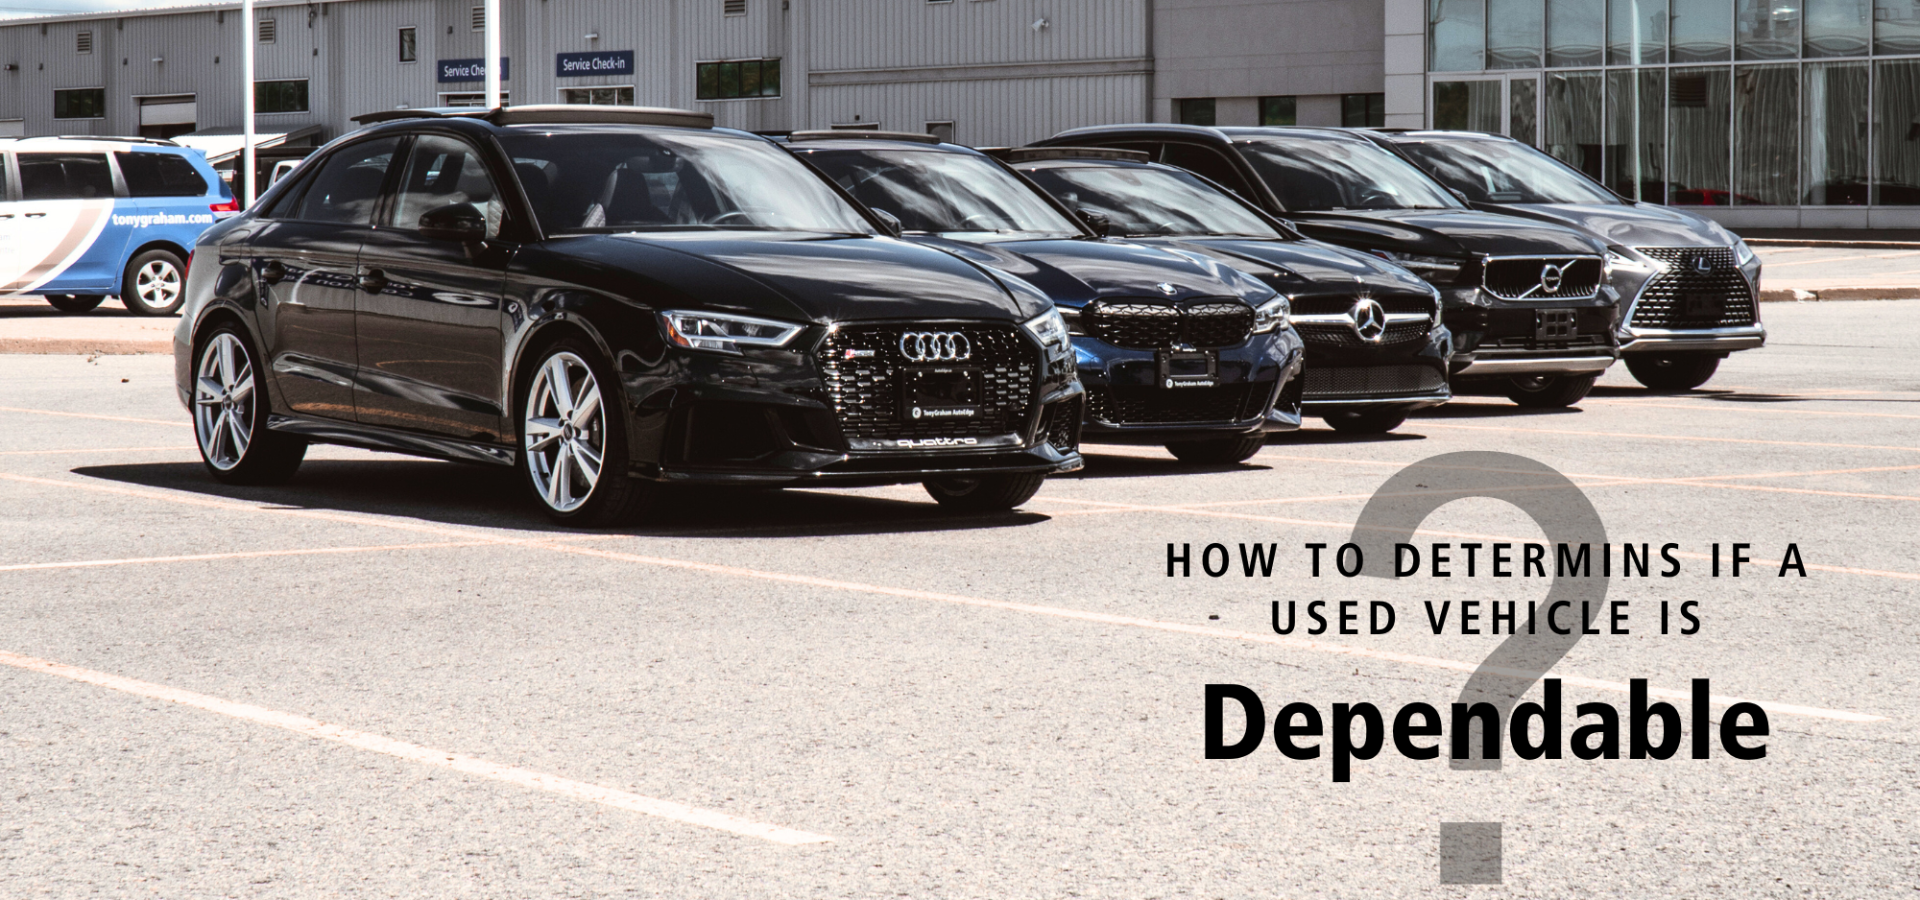 How to Determine if a Used Vehicle is Dependable